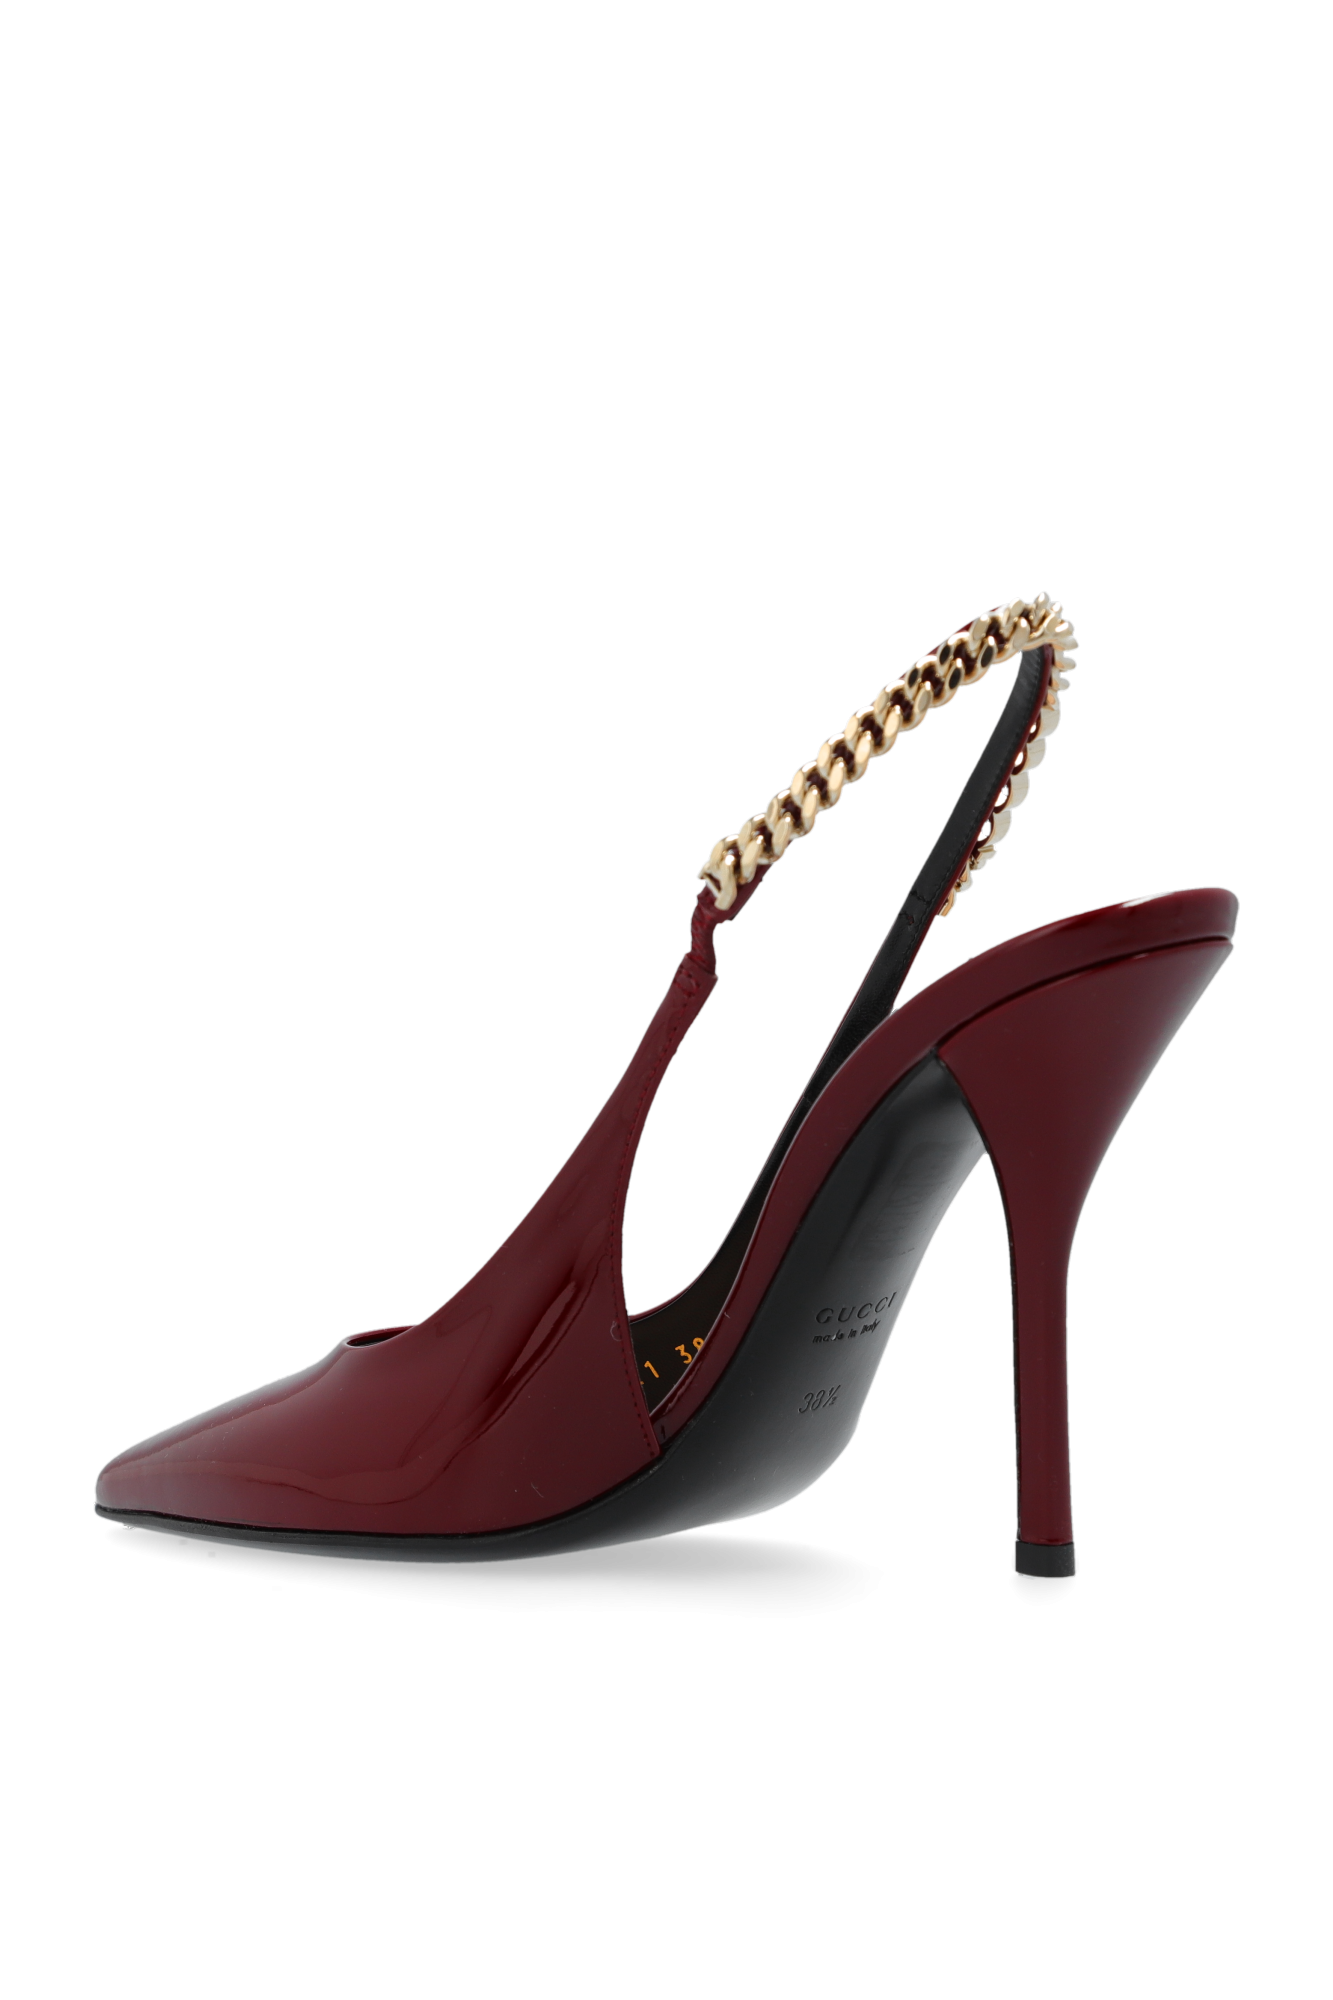 Gucci High-heeled shoes